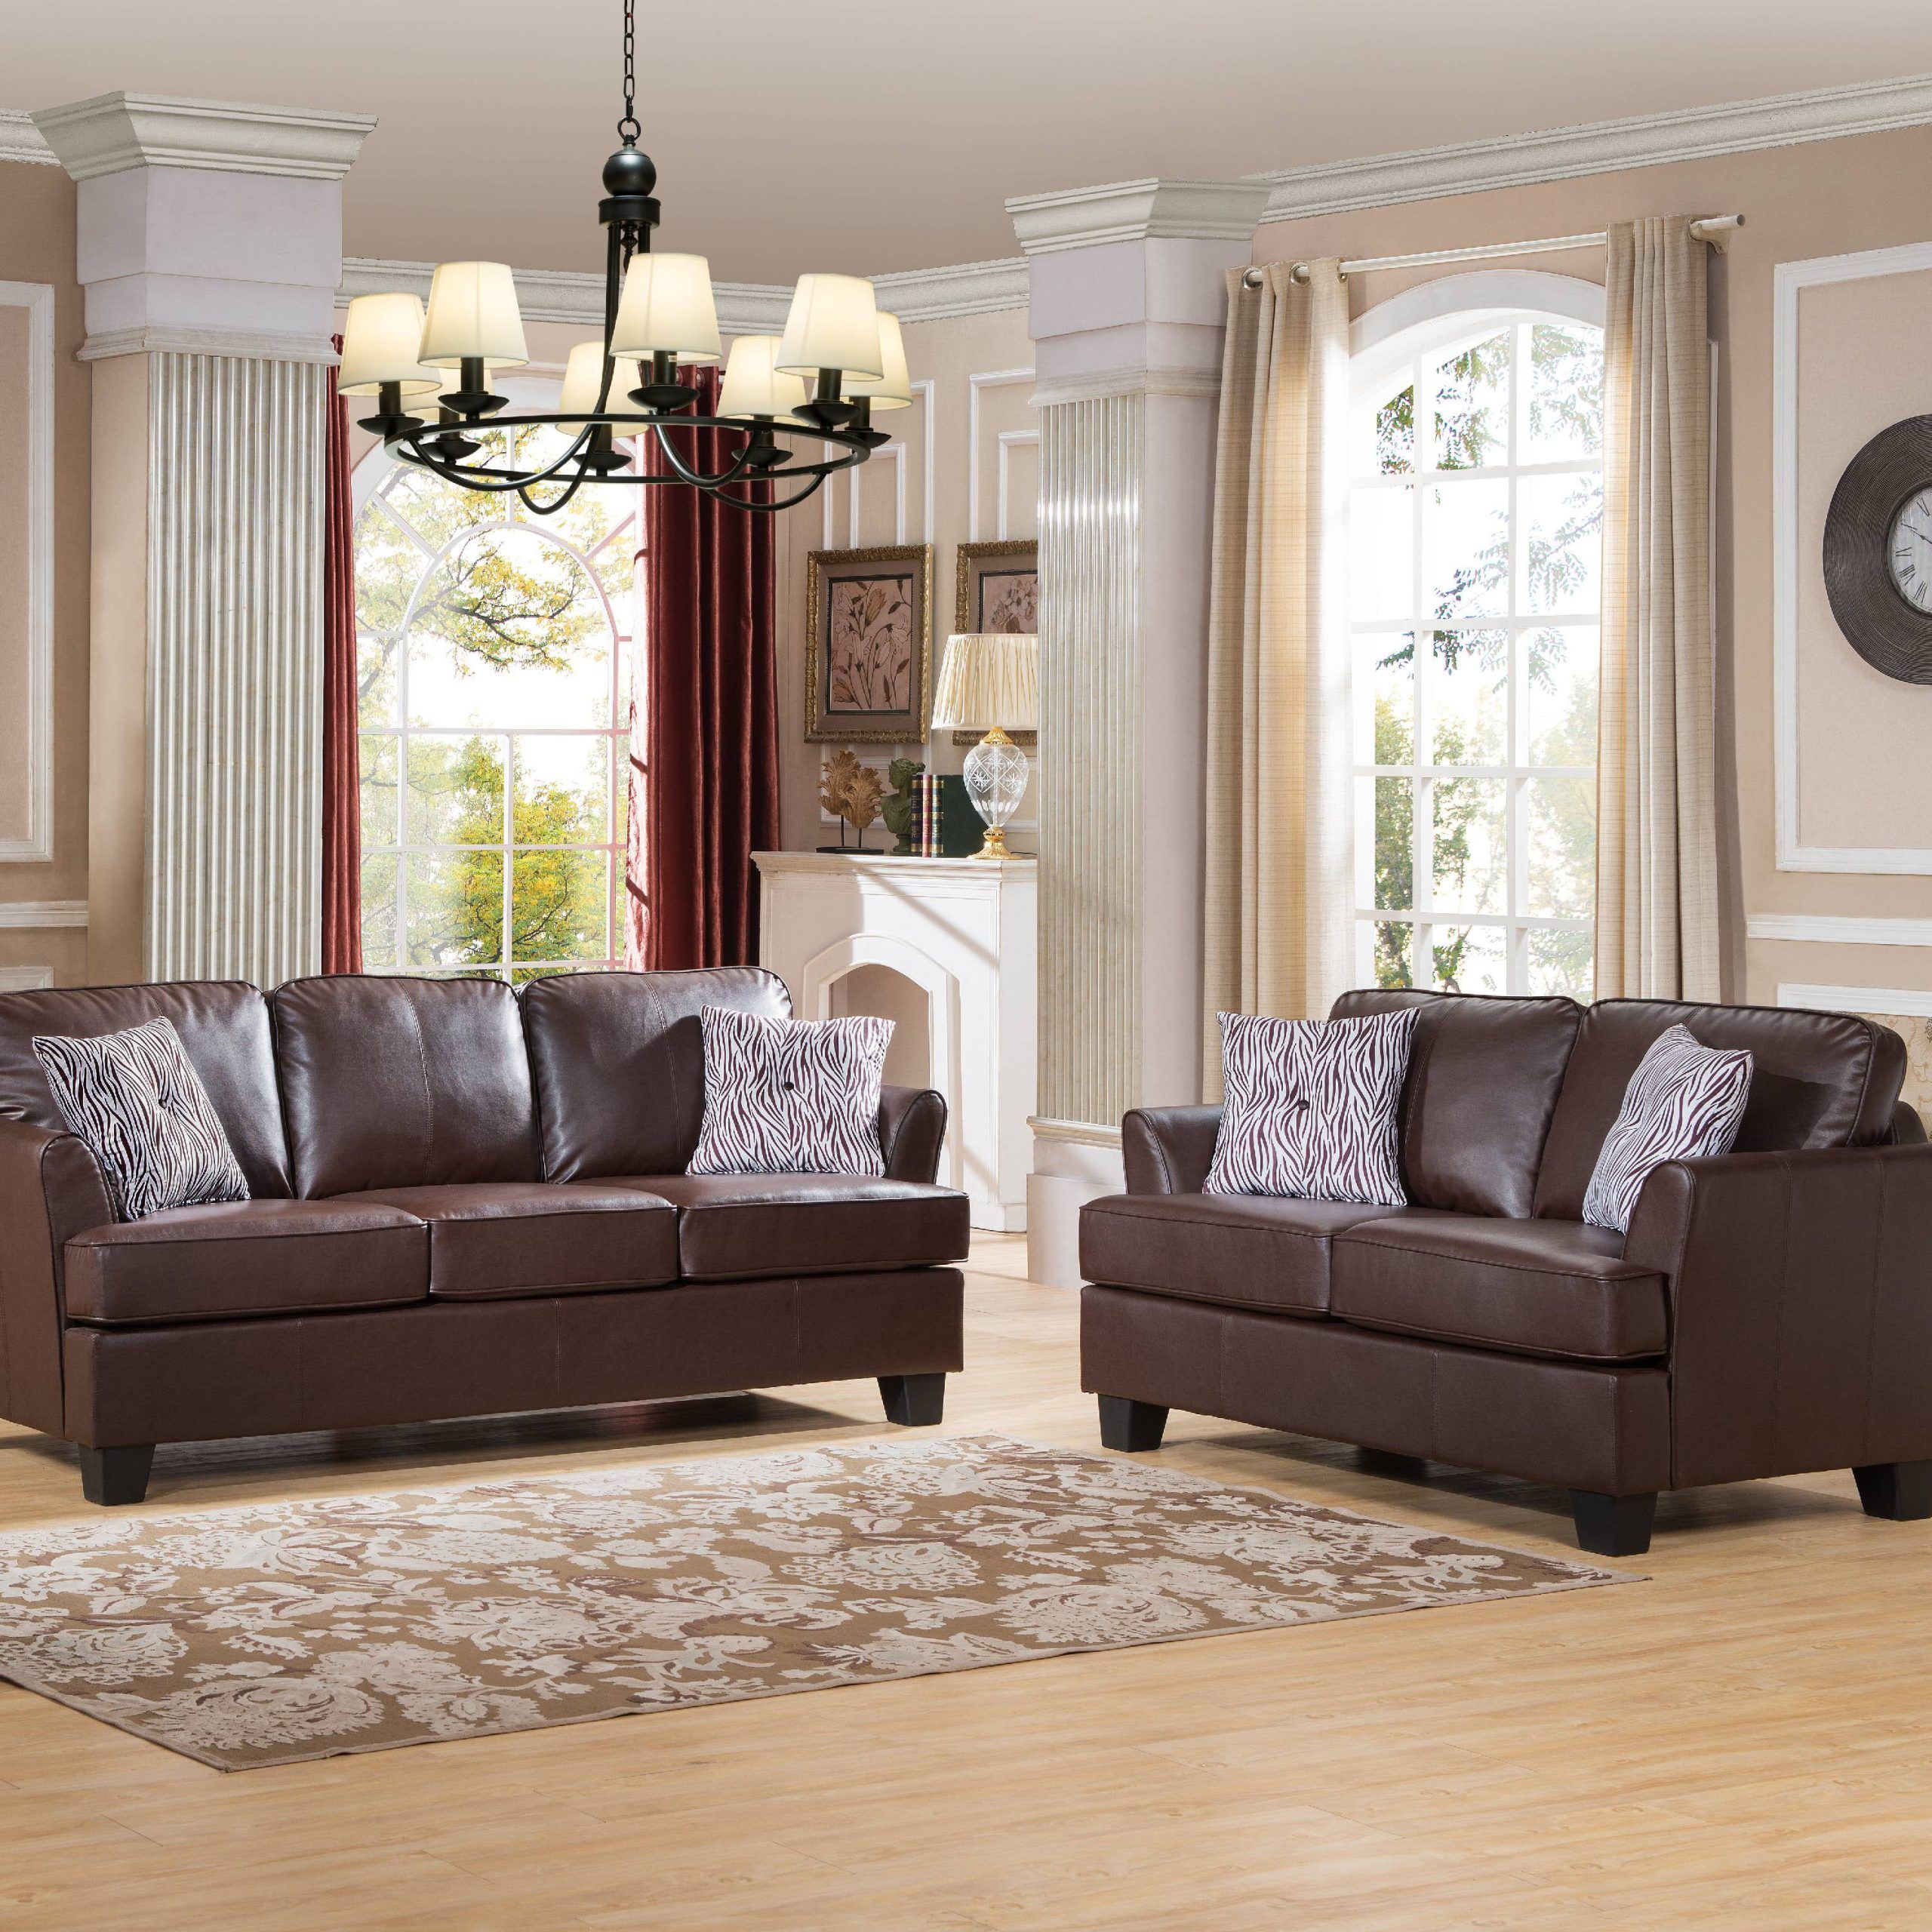 Most Current Faux Leather Sofas In Chocolate Brown Regarding 20+ Living Room Sofas (View 9 of 15)